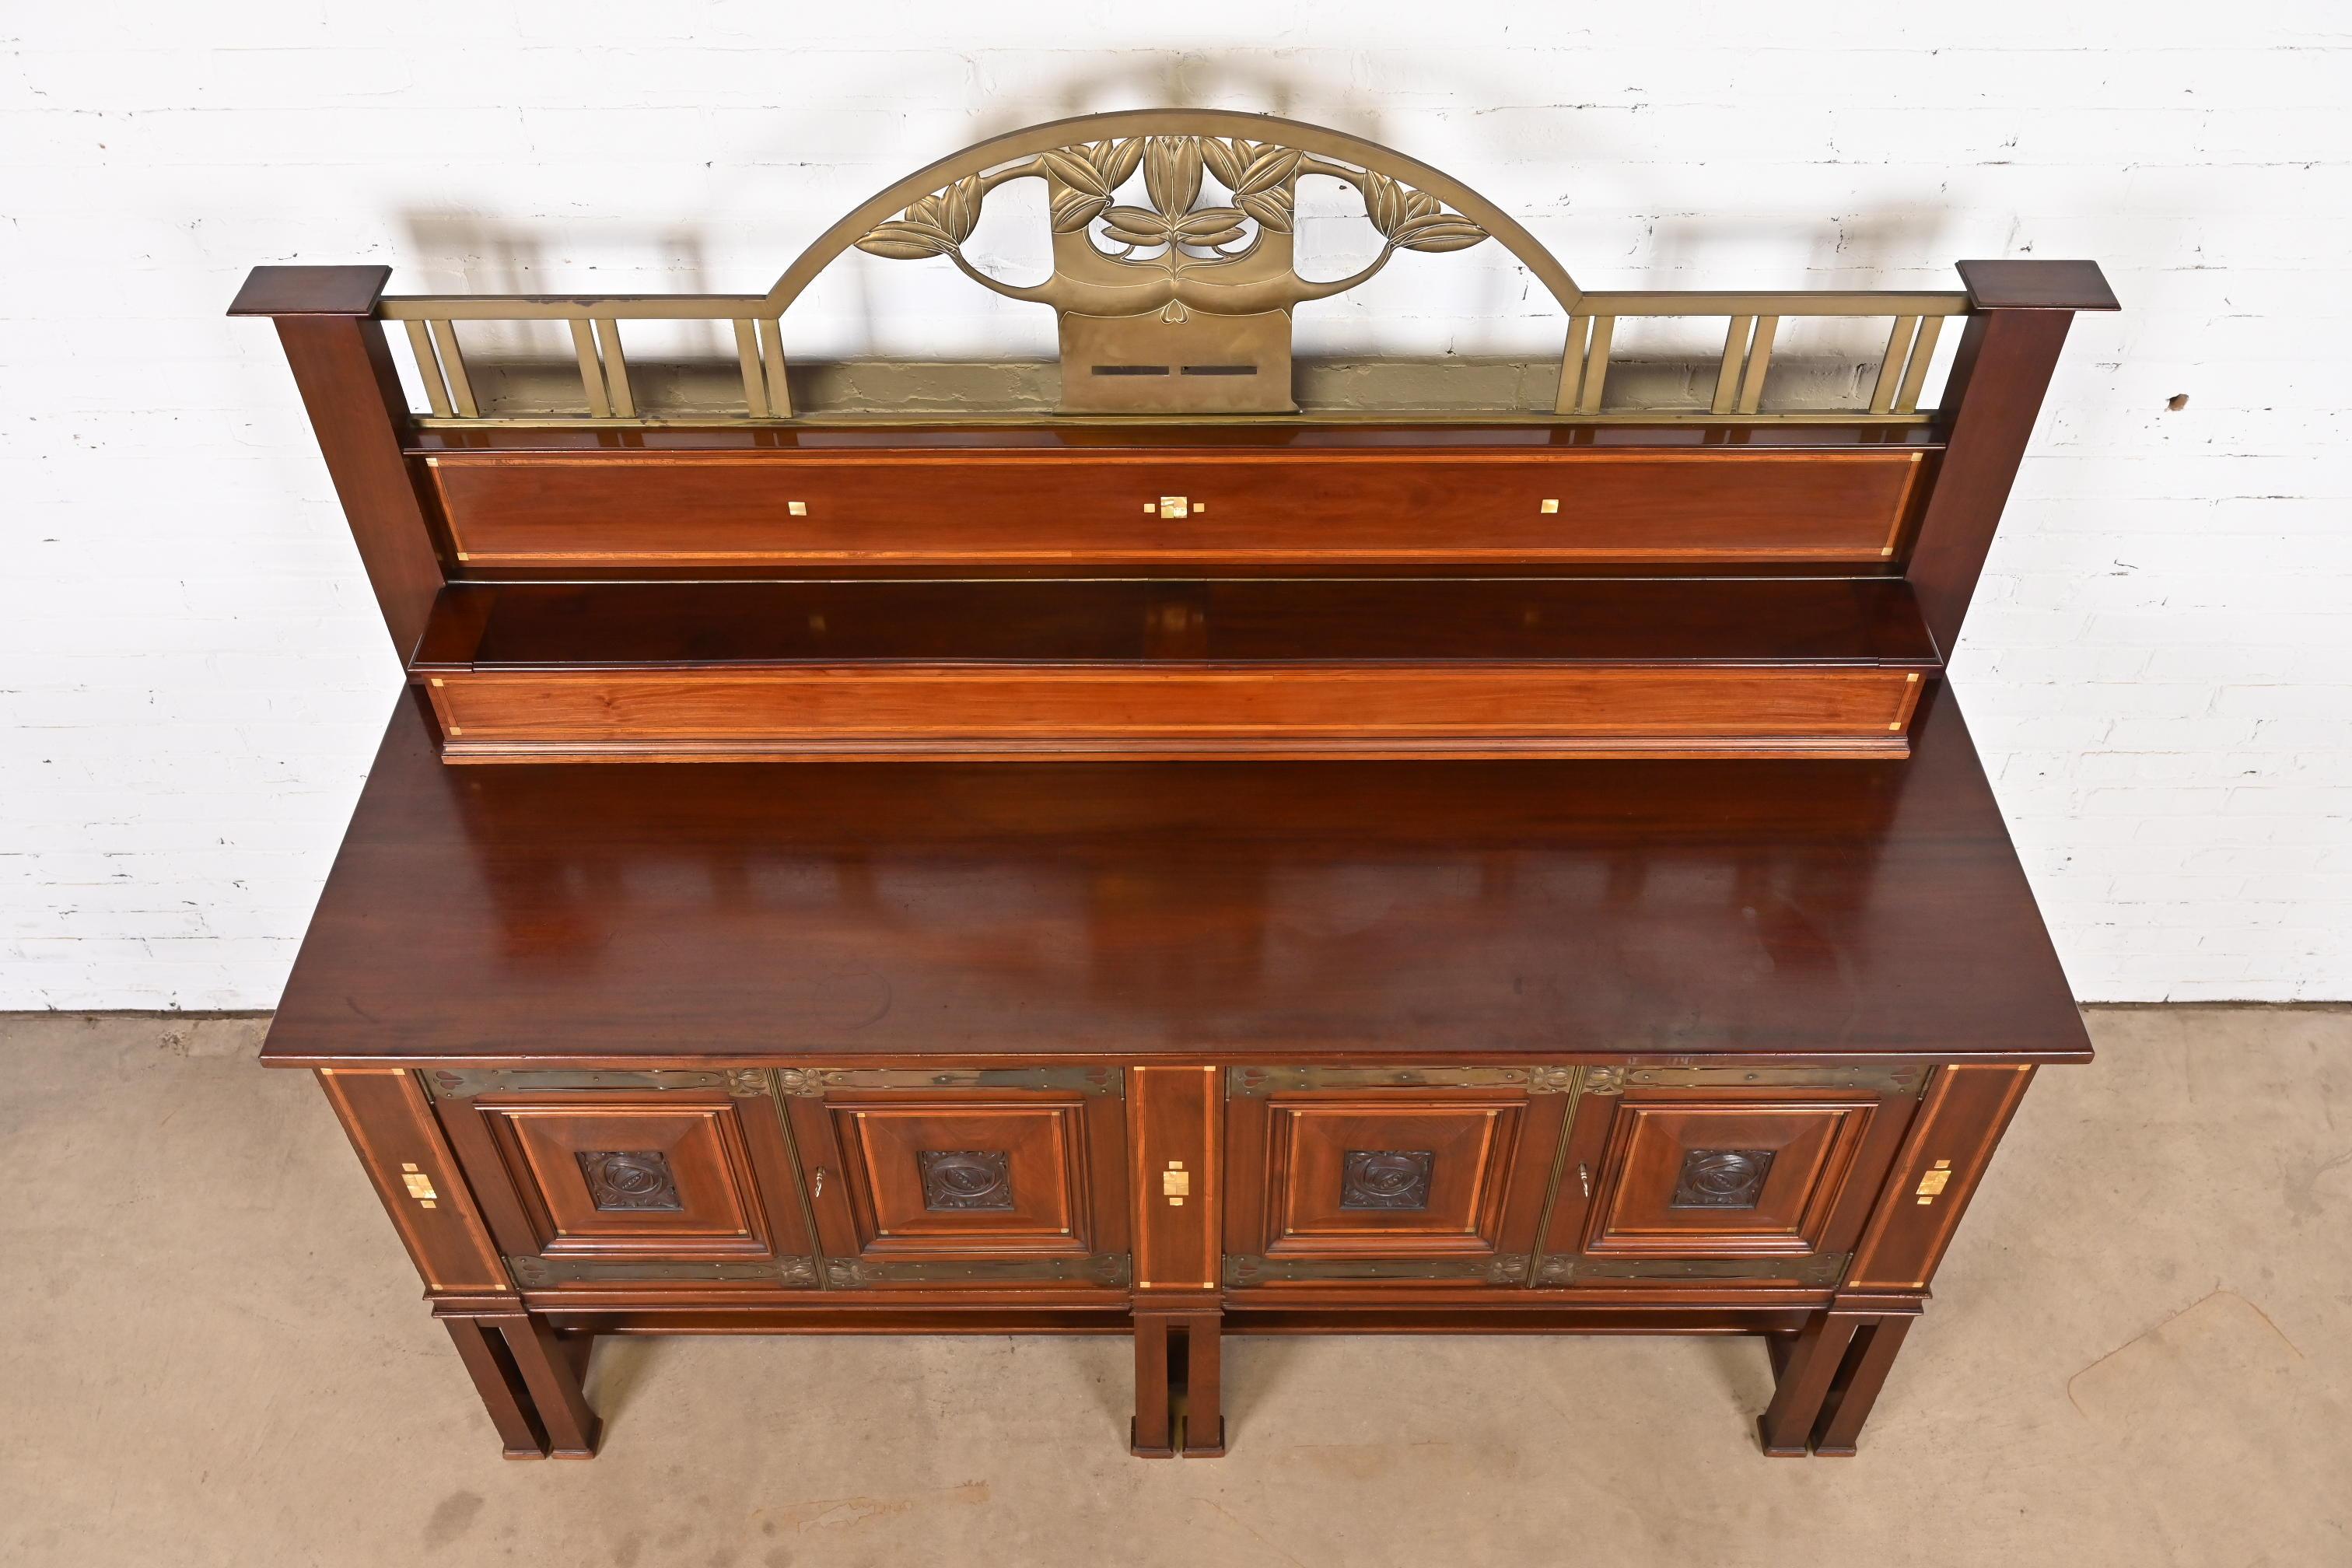 Antique English Arts & Crafts Inlaid Mahogany Sideboard by Robson & Sons For Sale 1